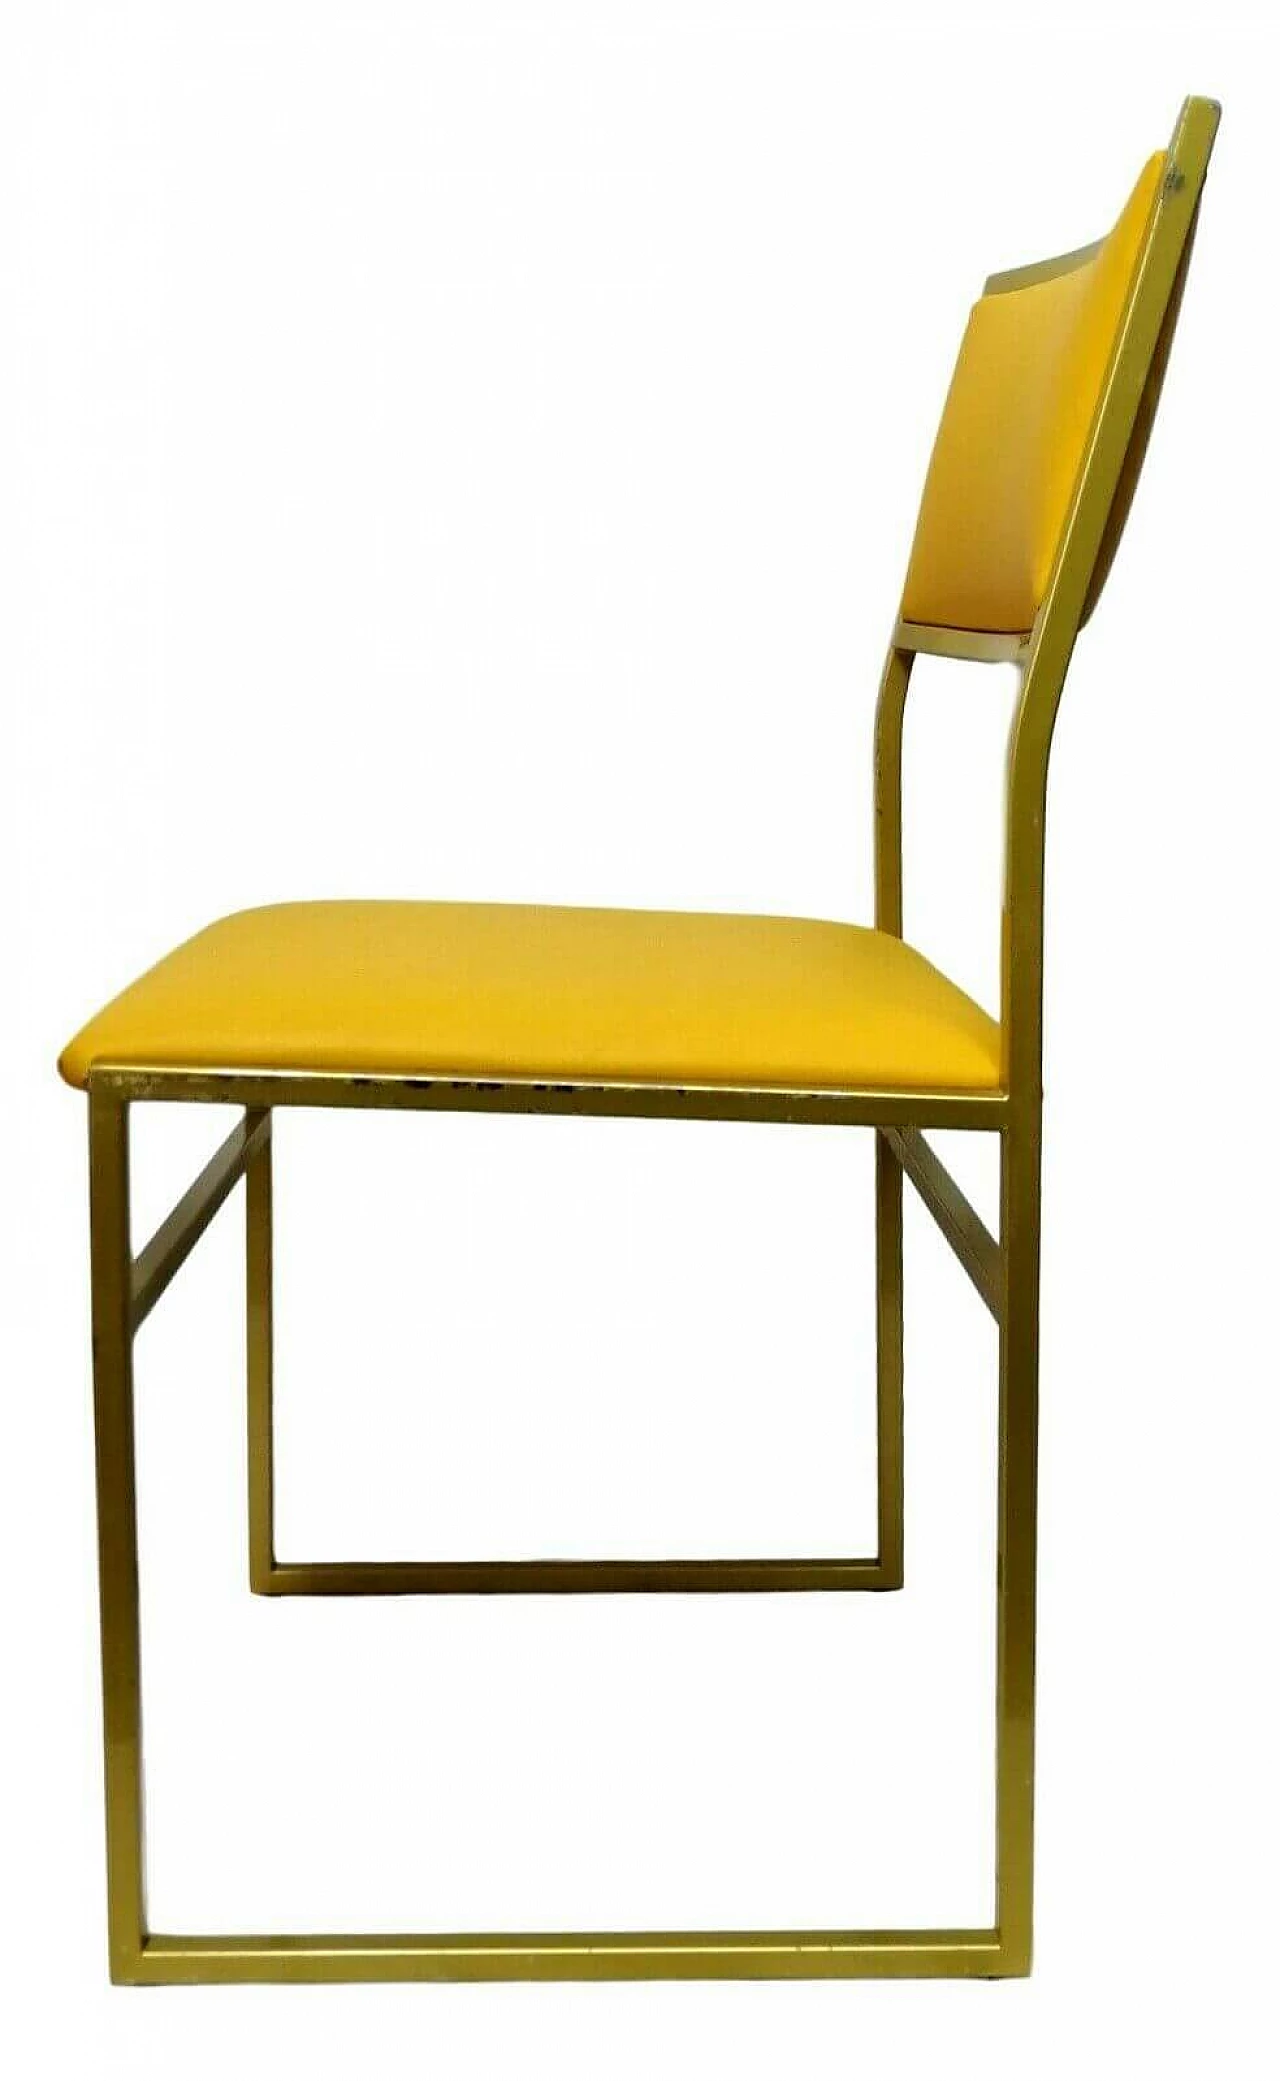 Metal chair and seat yellow, 70s 1166238